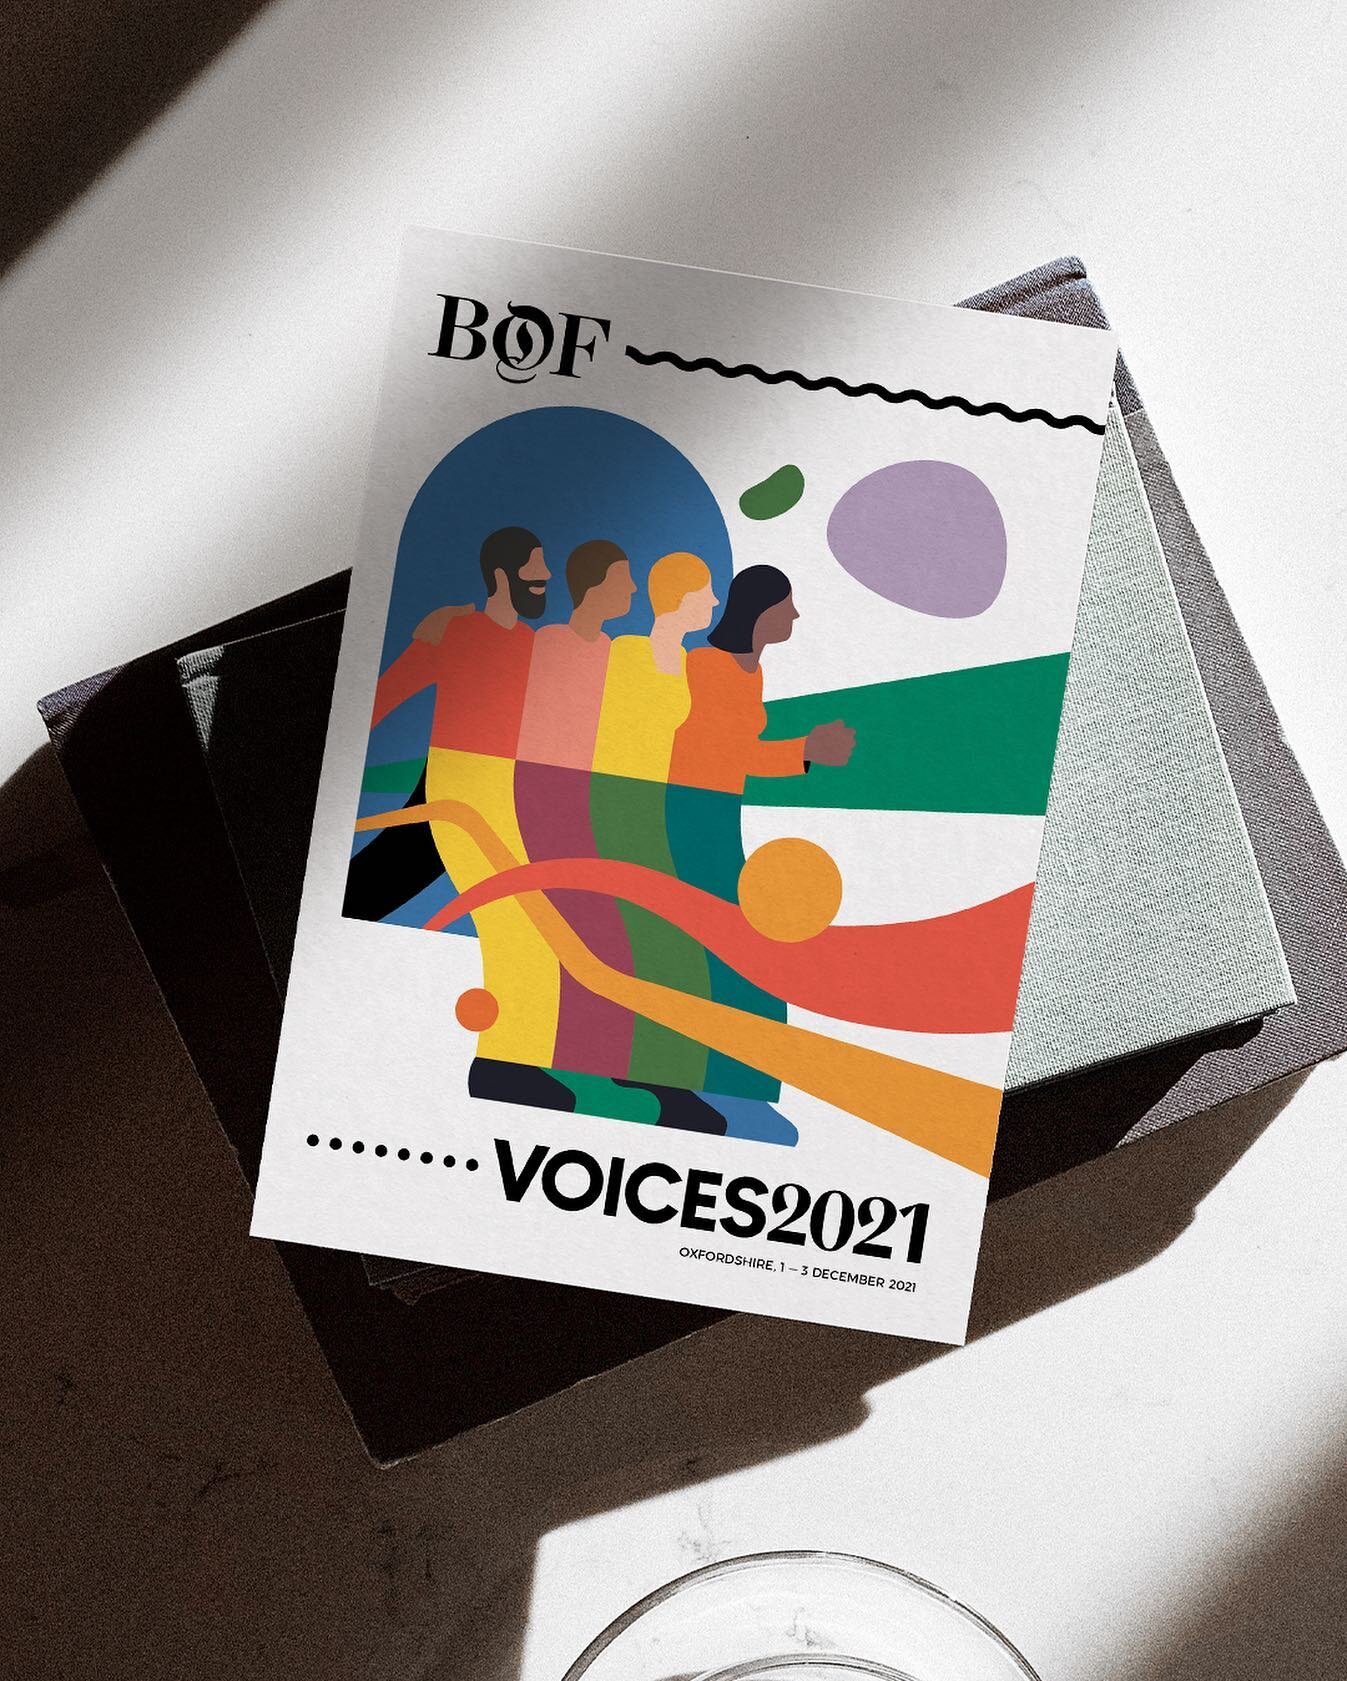 Working with the brilliant @francescociccolella for this years @bof VOICES identity, coming out the other side of a post pandemic world 🌎💙 #BoFVOICES
 
 
 
 
 

#sustainablefashion #graphicdesign #identity #brandidentity #design #designer #designin